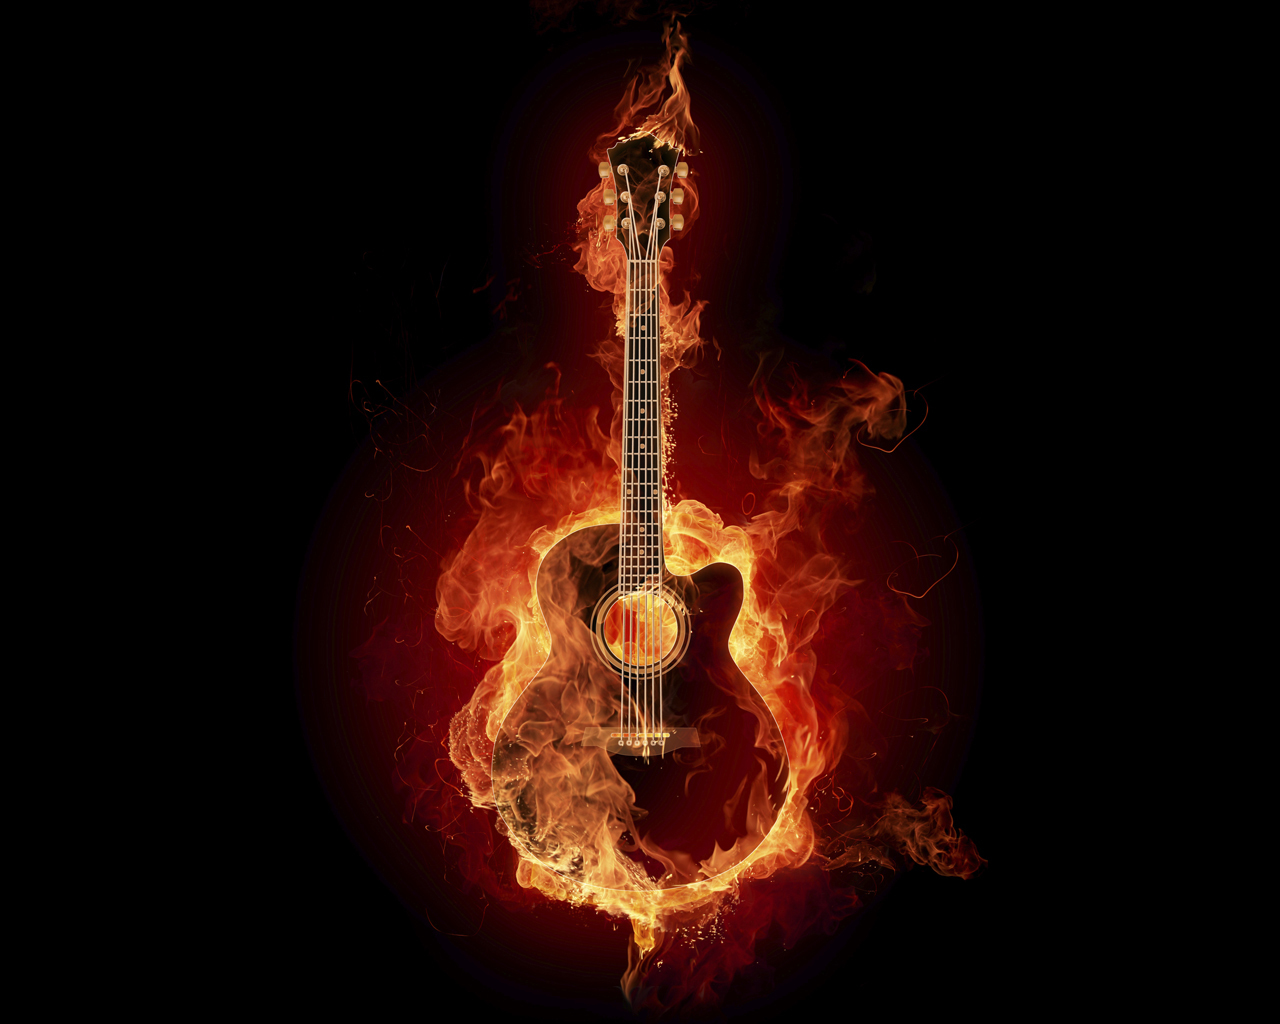 android guitars, music, fire, black